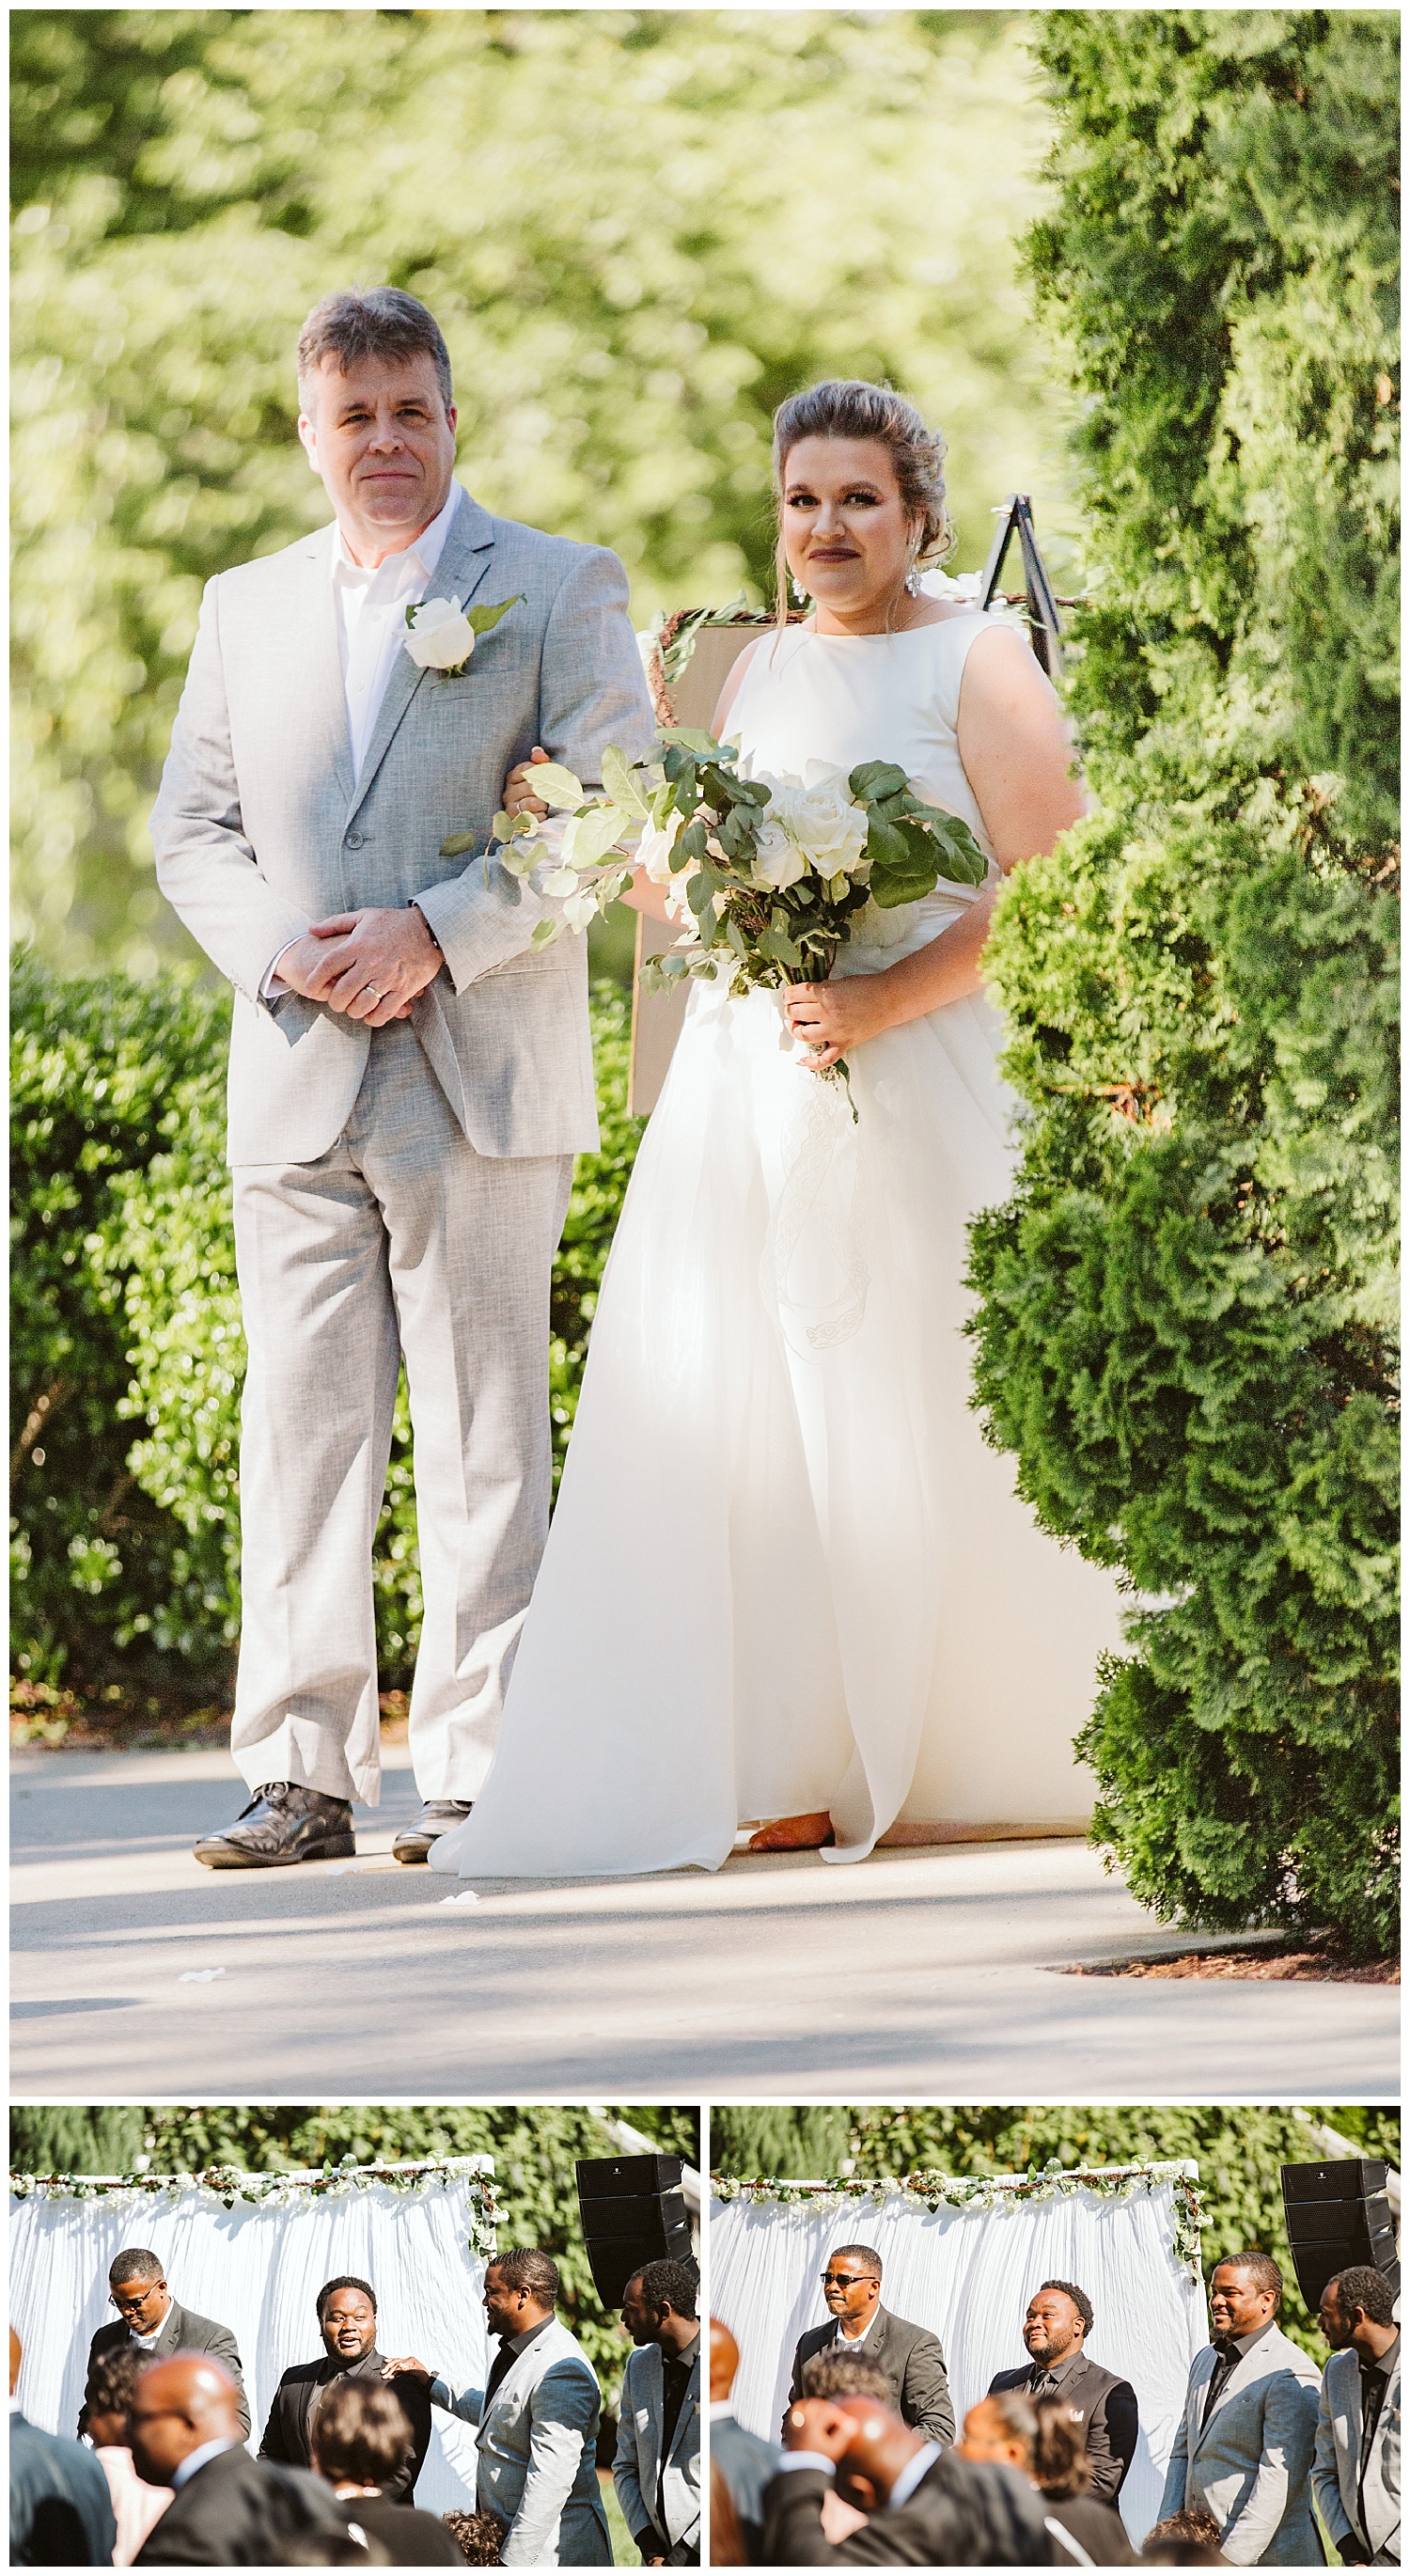 dad walking daughter in white dress down the aisle, The Cordelle, Nashville wedding photography, Country Music Hall of Fame wedding reception, Tennessee wedding Planning, Wedding Inspiration, Engagement Inspiration, Downtown Nashville, The Cordelle Nashville, wedding venue